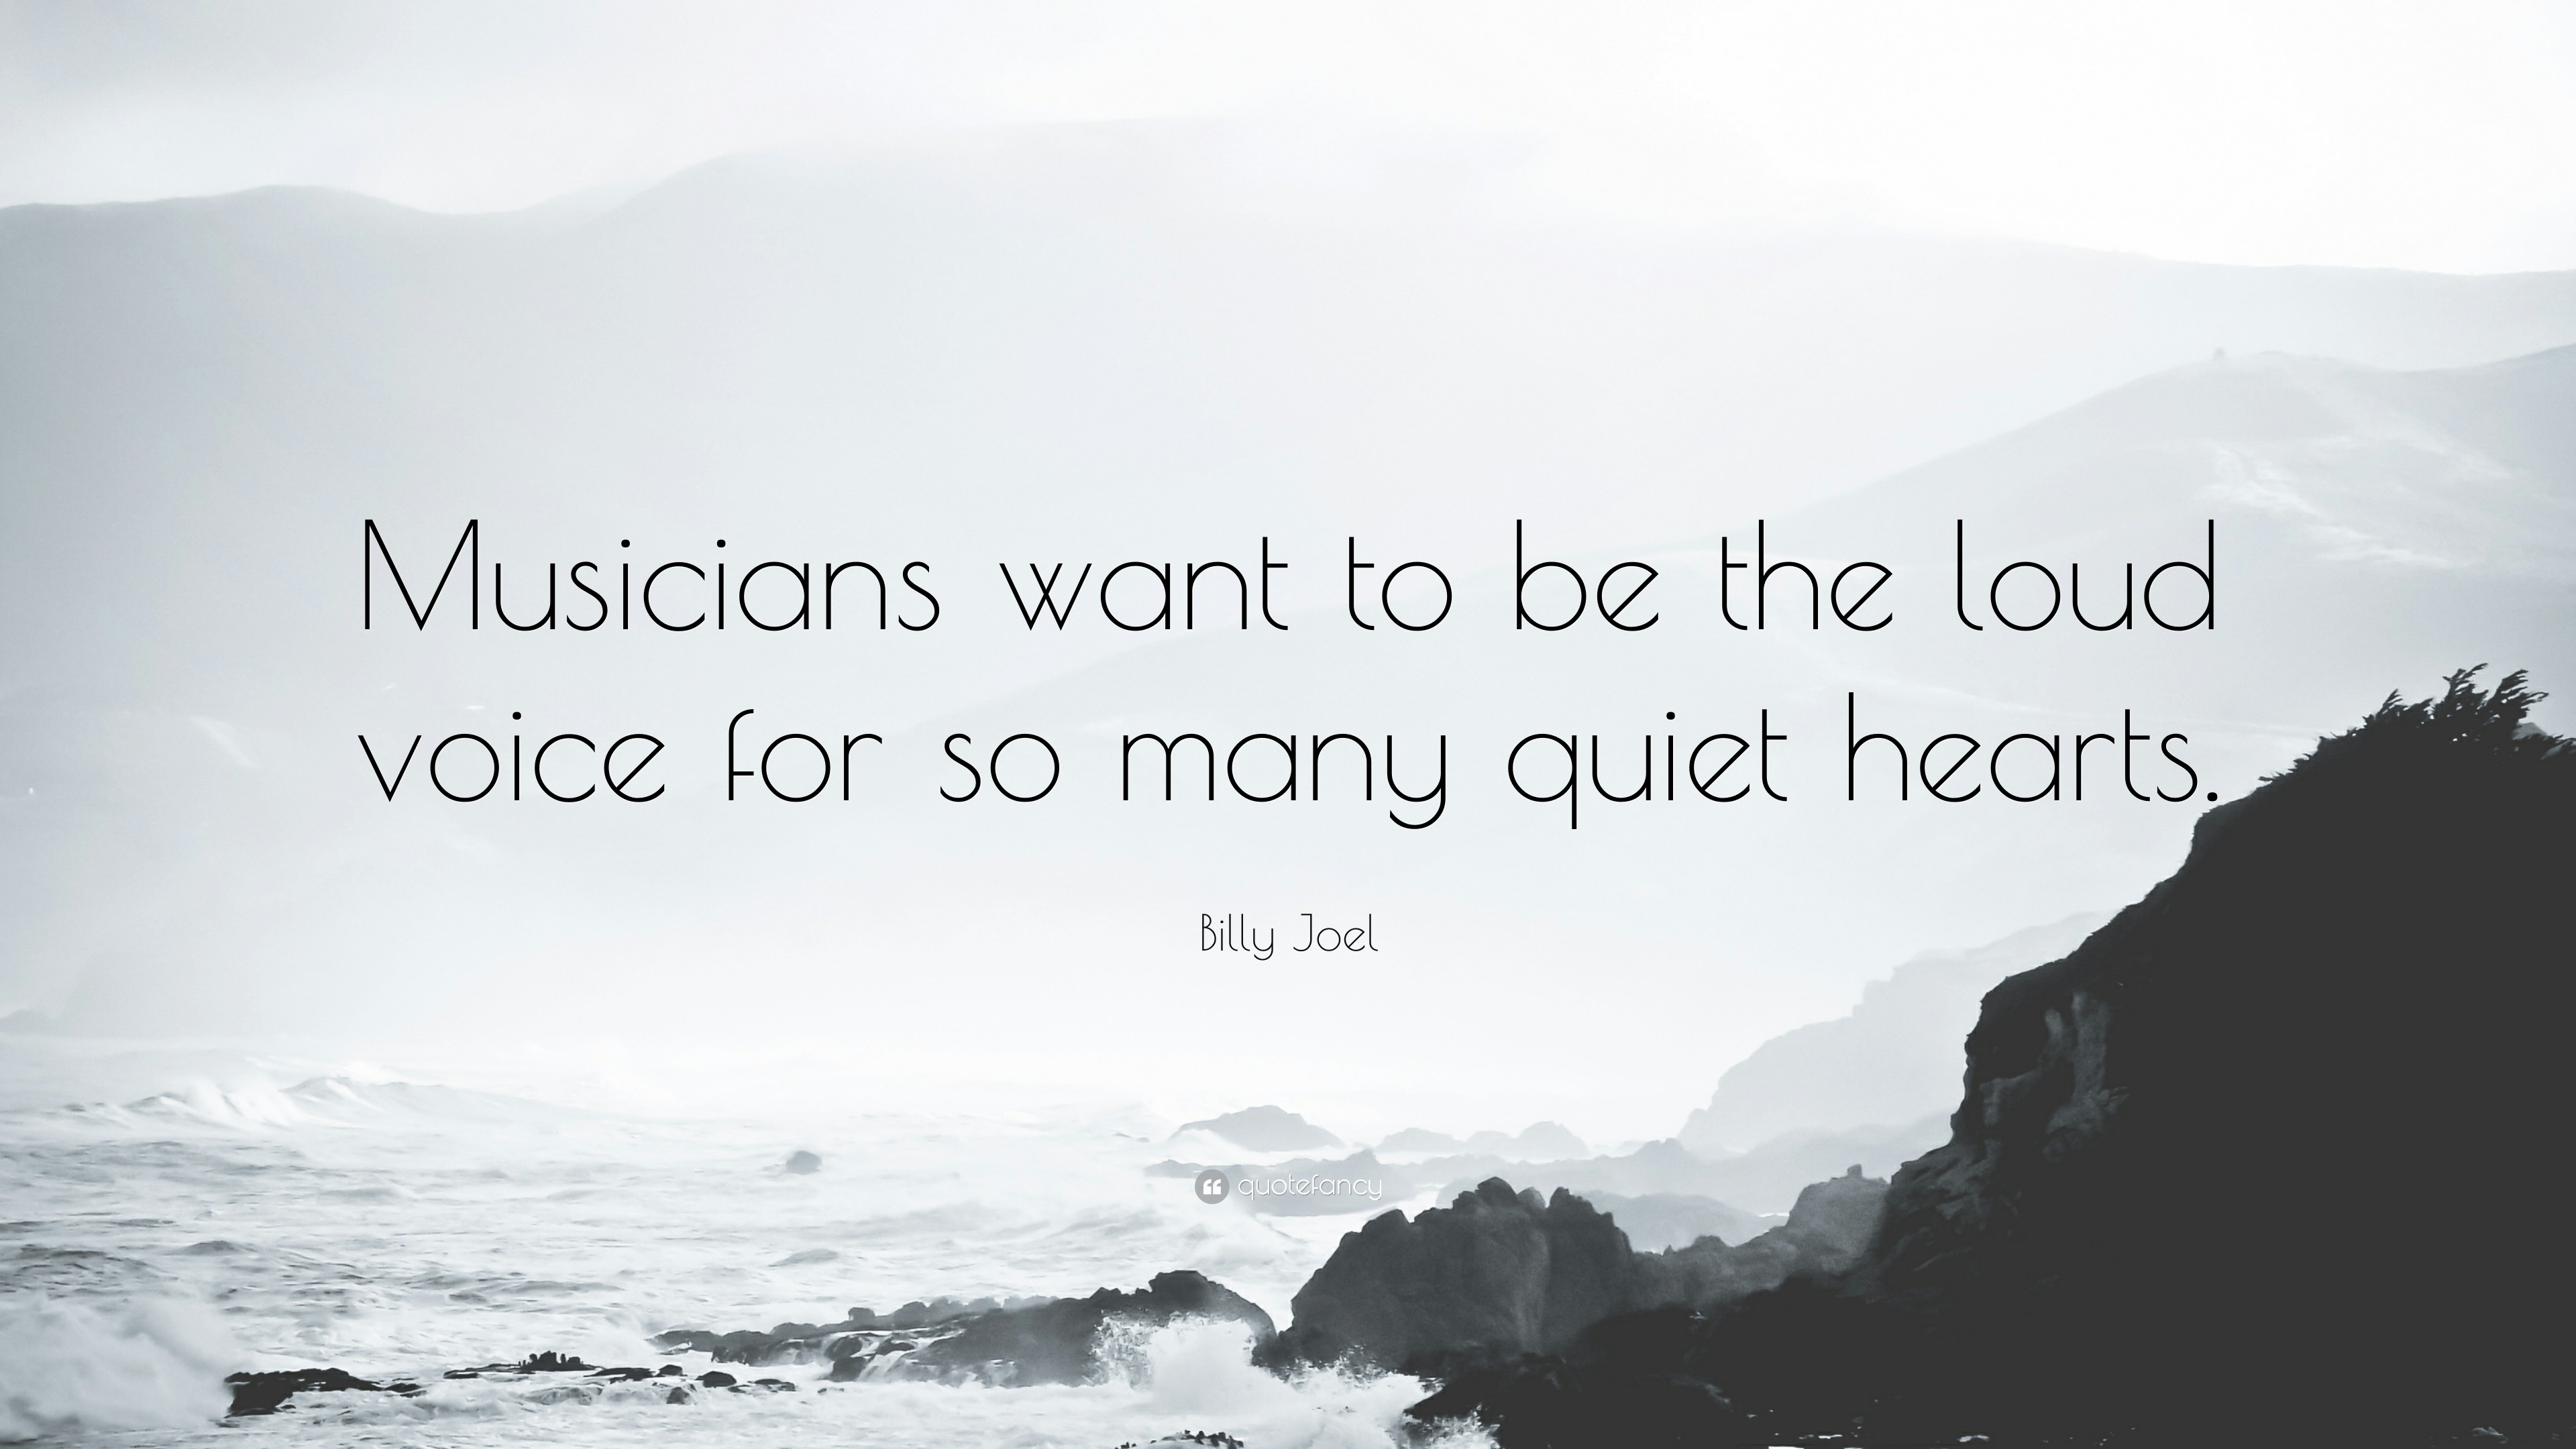 Image result for musicians want to the voice for quiet hearts